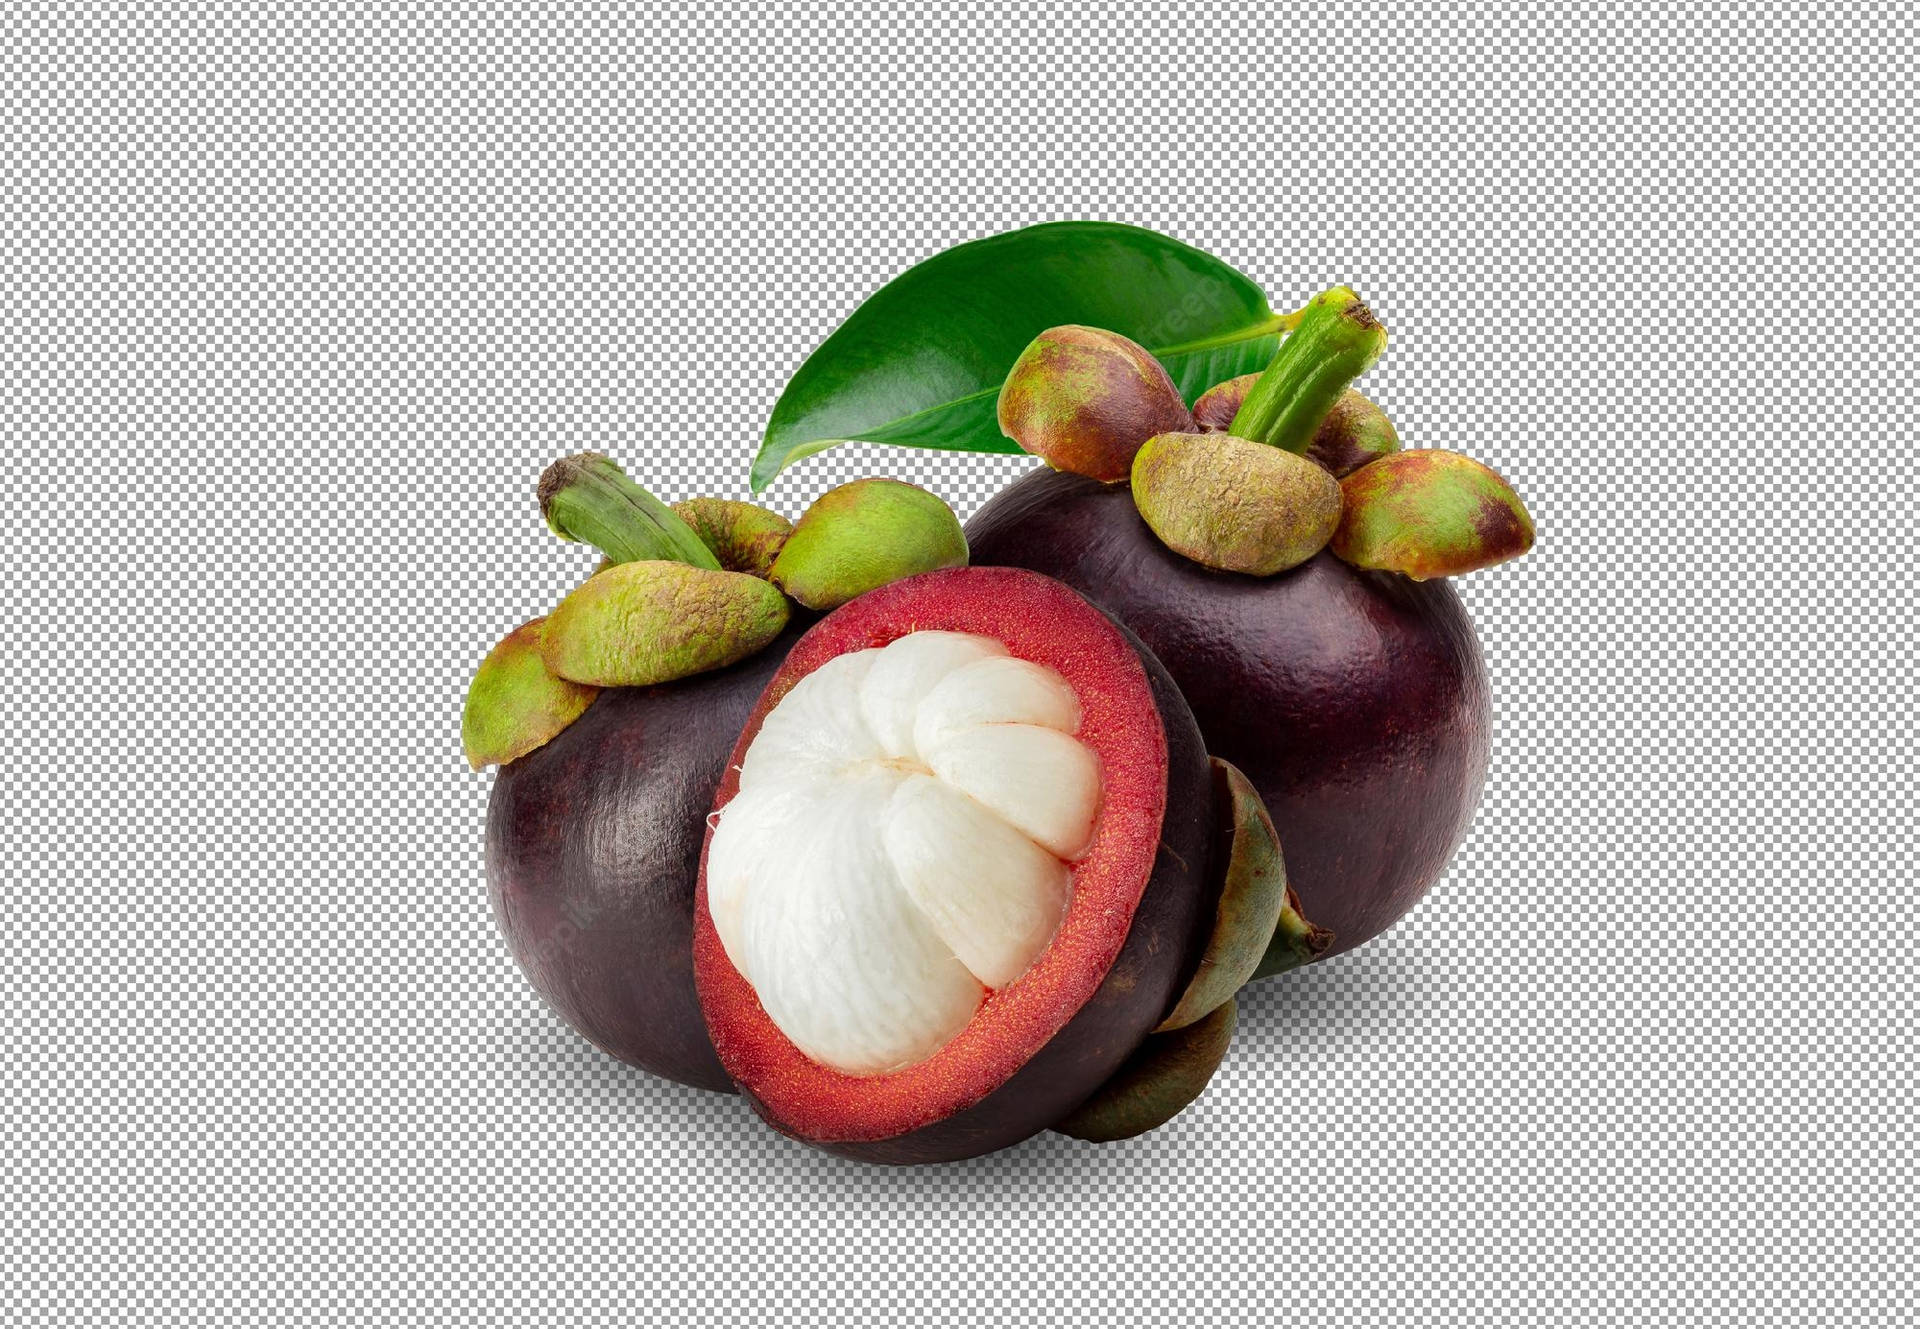 Tropical Evergreen Mangosteen Picture